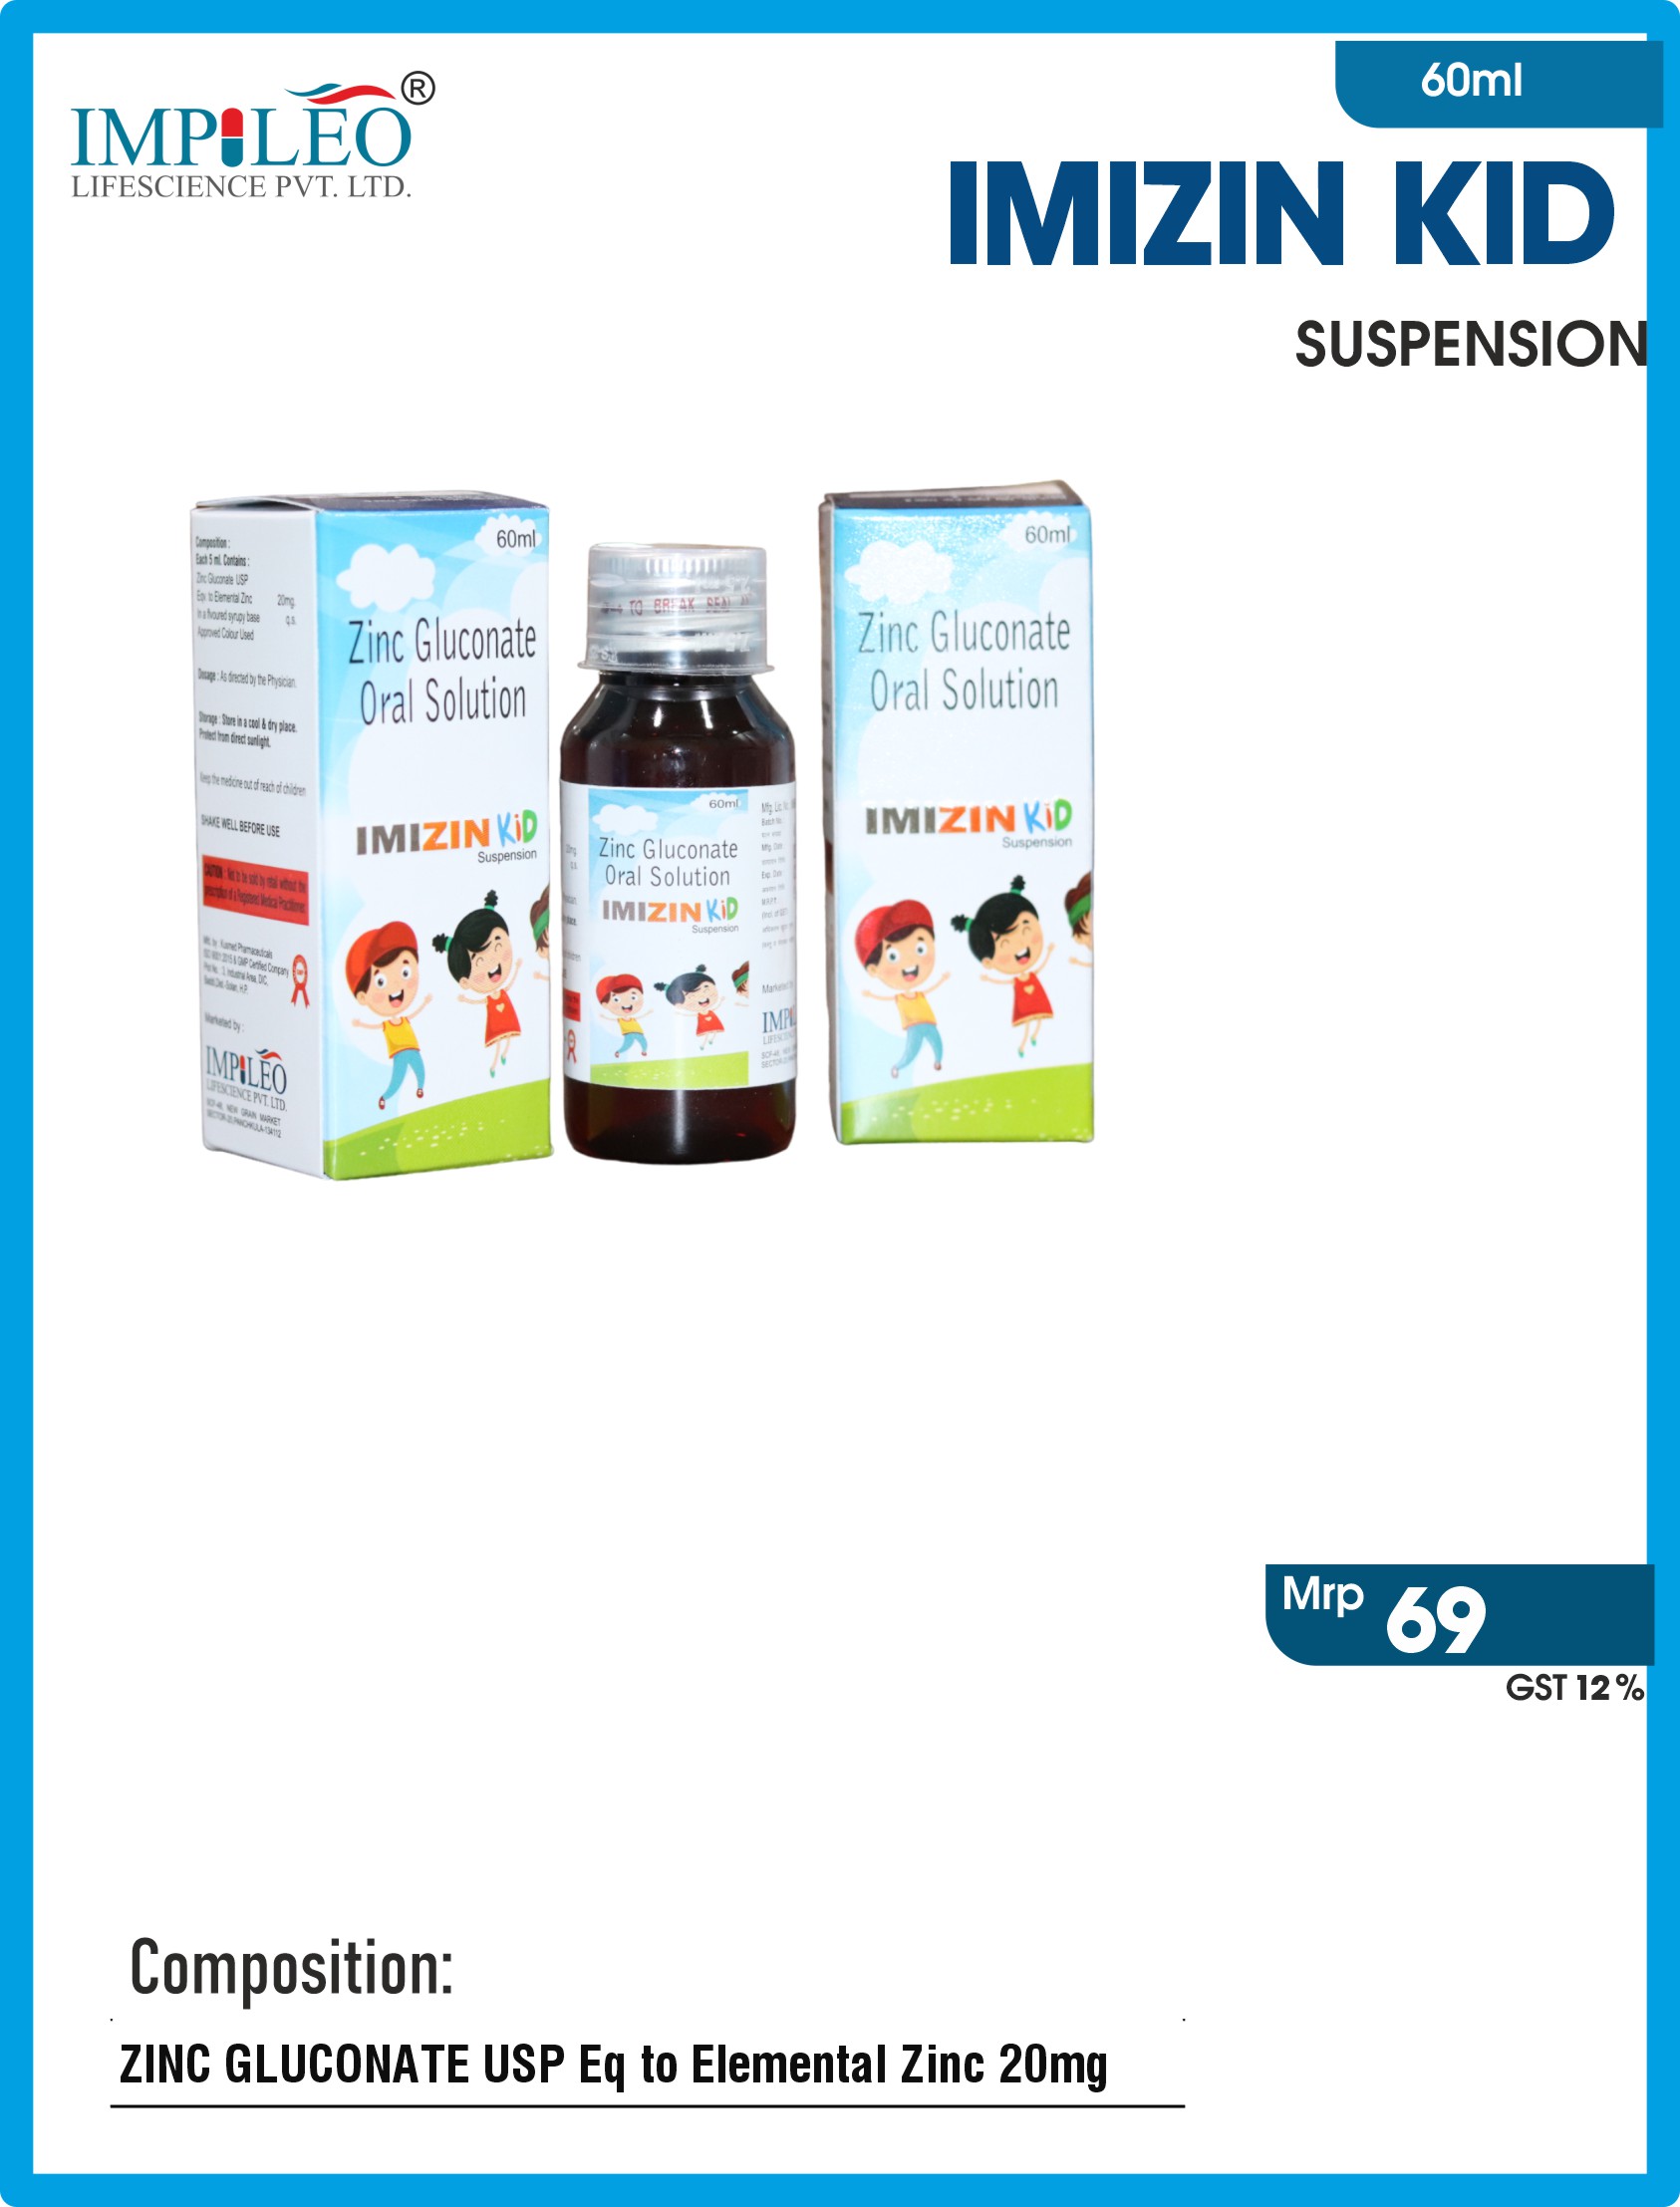 Get Imizin Kid Syrup: PCD Pharma Franchise in Chandigarh - Quality Pediatric Supplement